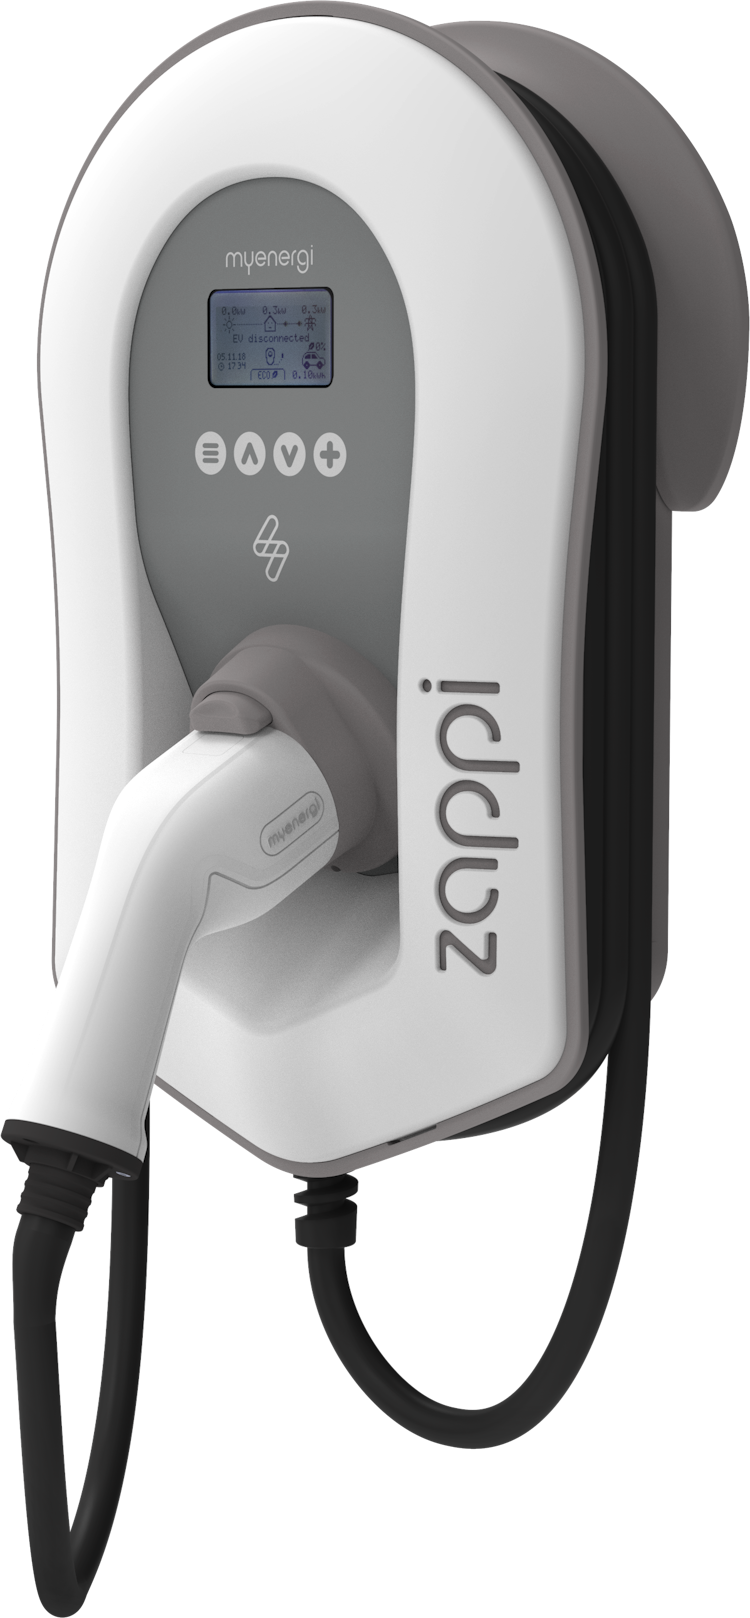 myenergi Zappi electric car charger in white